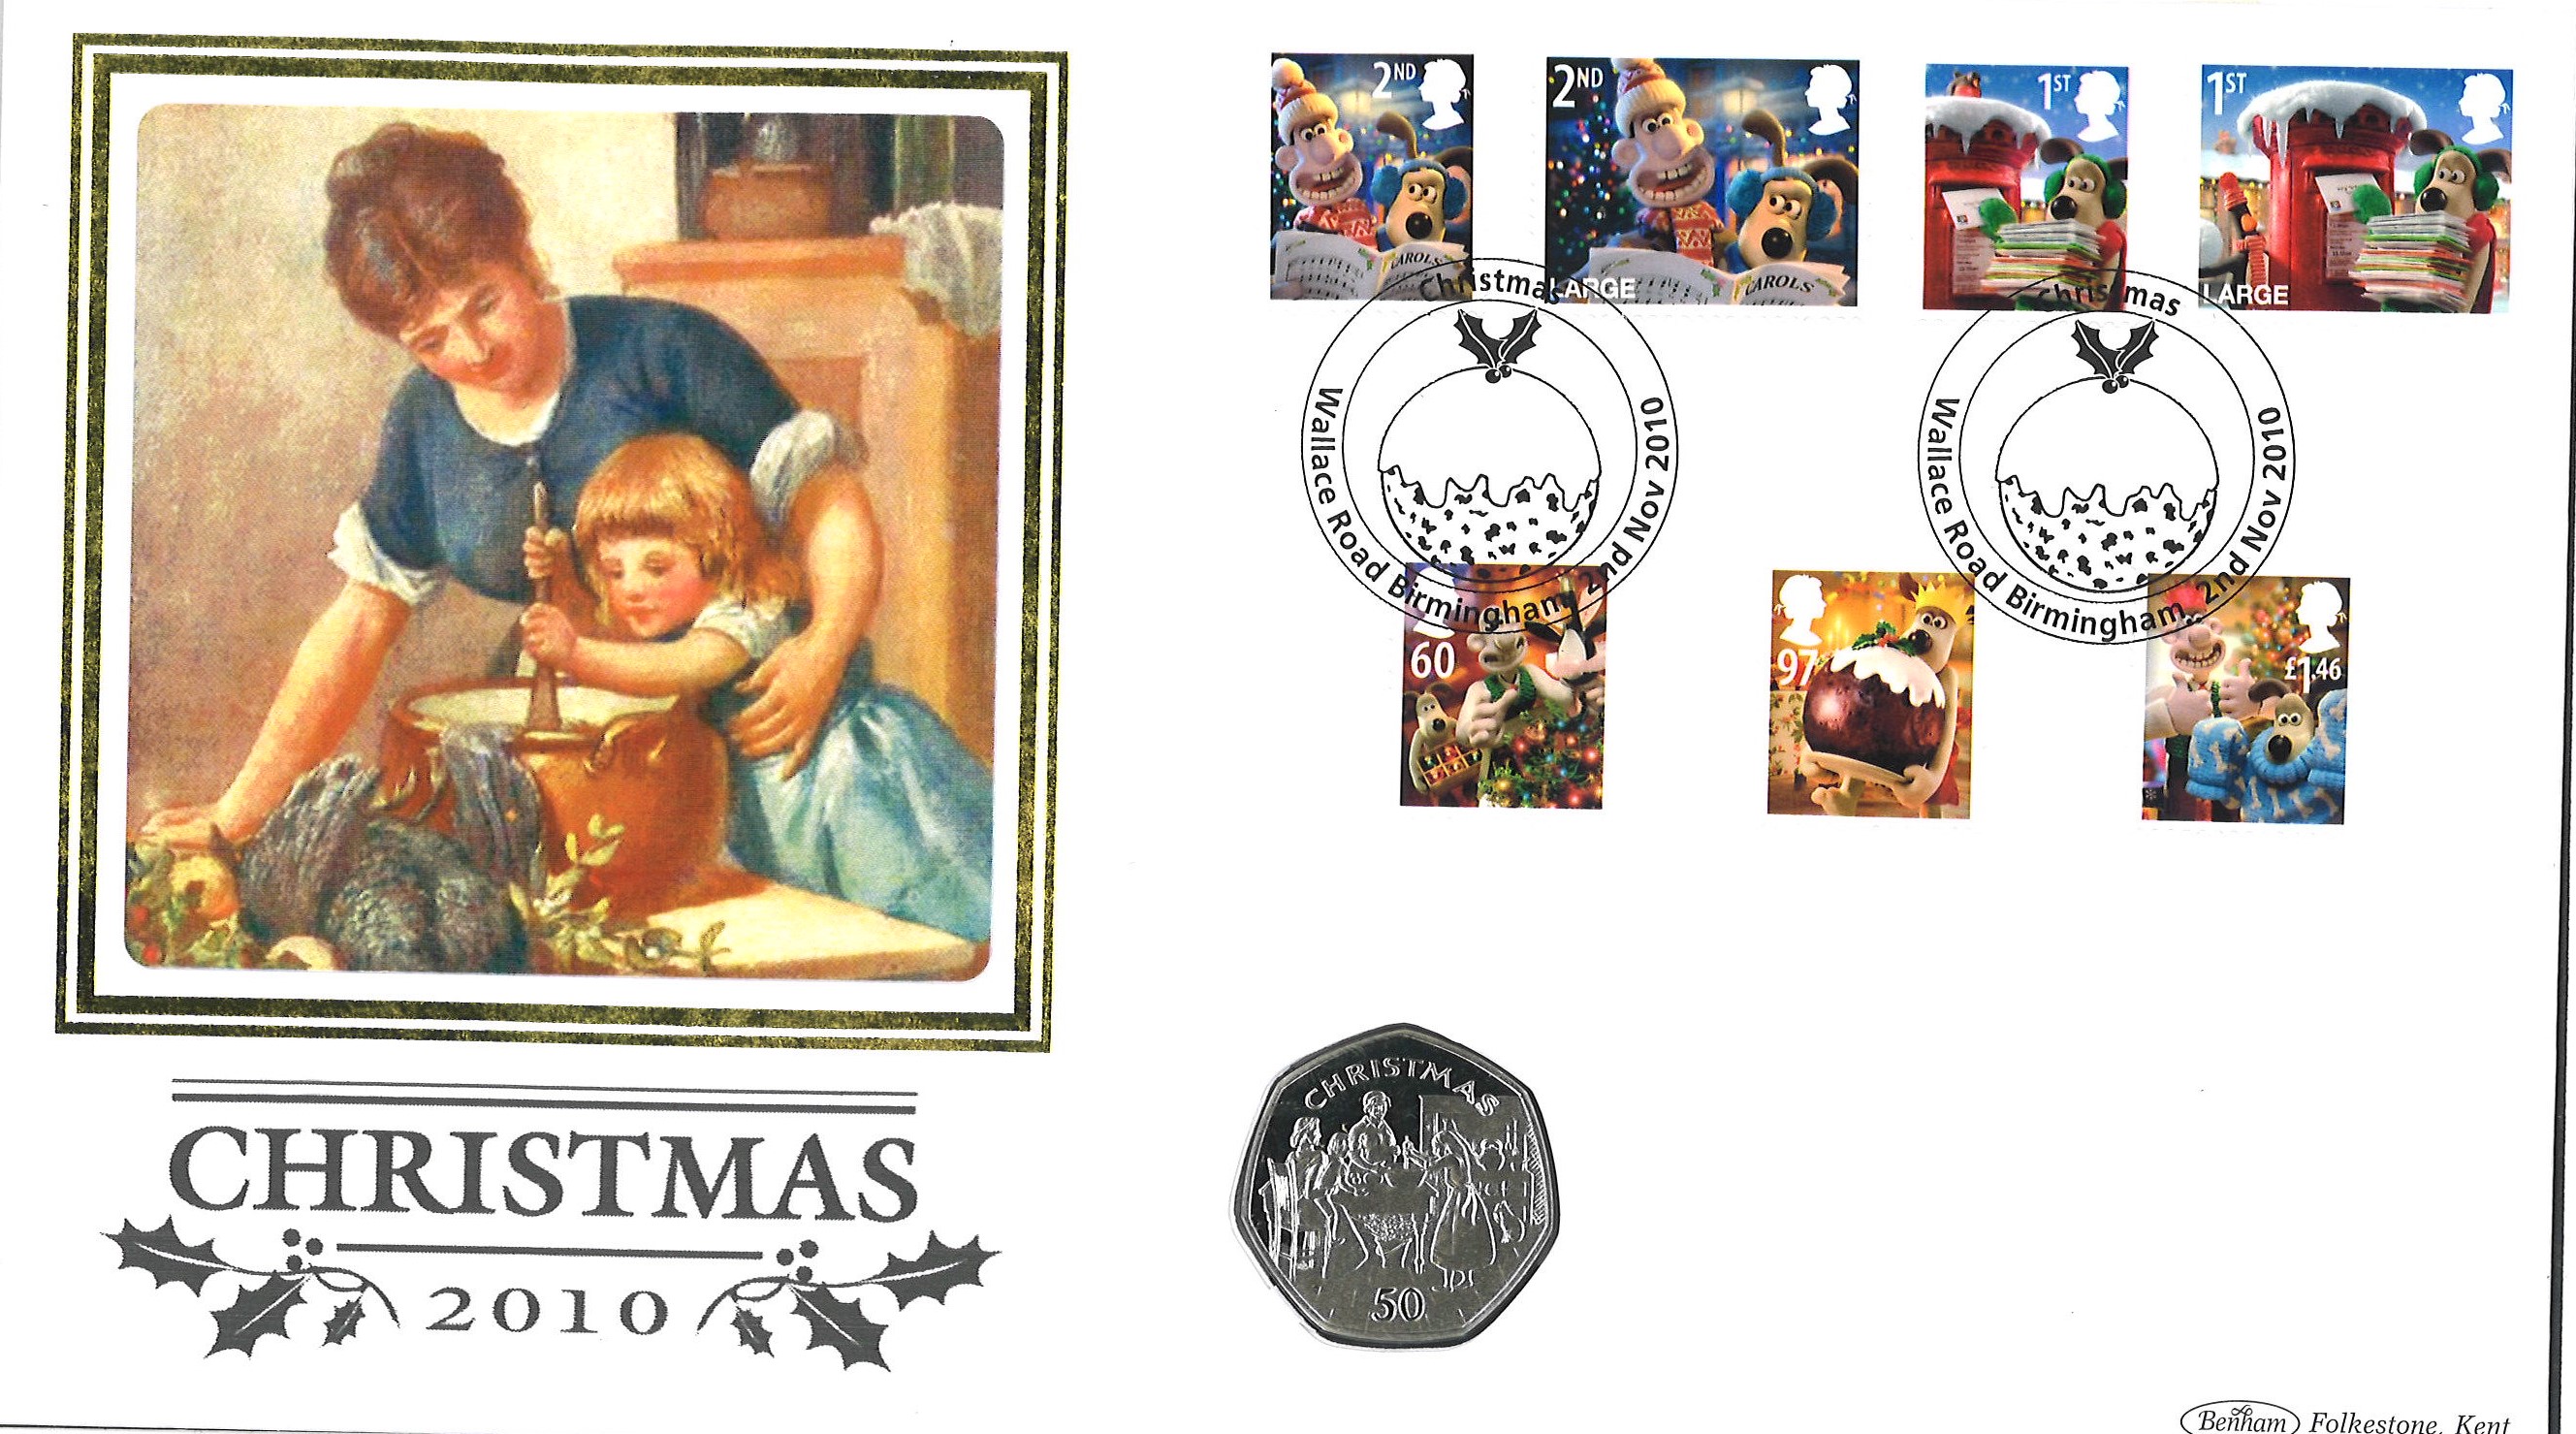 Christmas 2010 coin cover. Benham official FDC PNC, with 2002 Isle of Man 50p coin inset. Wallace